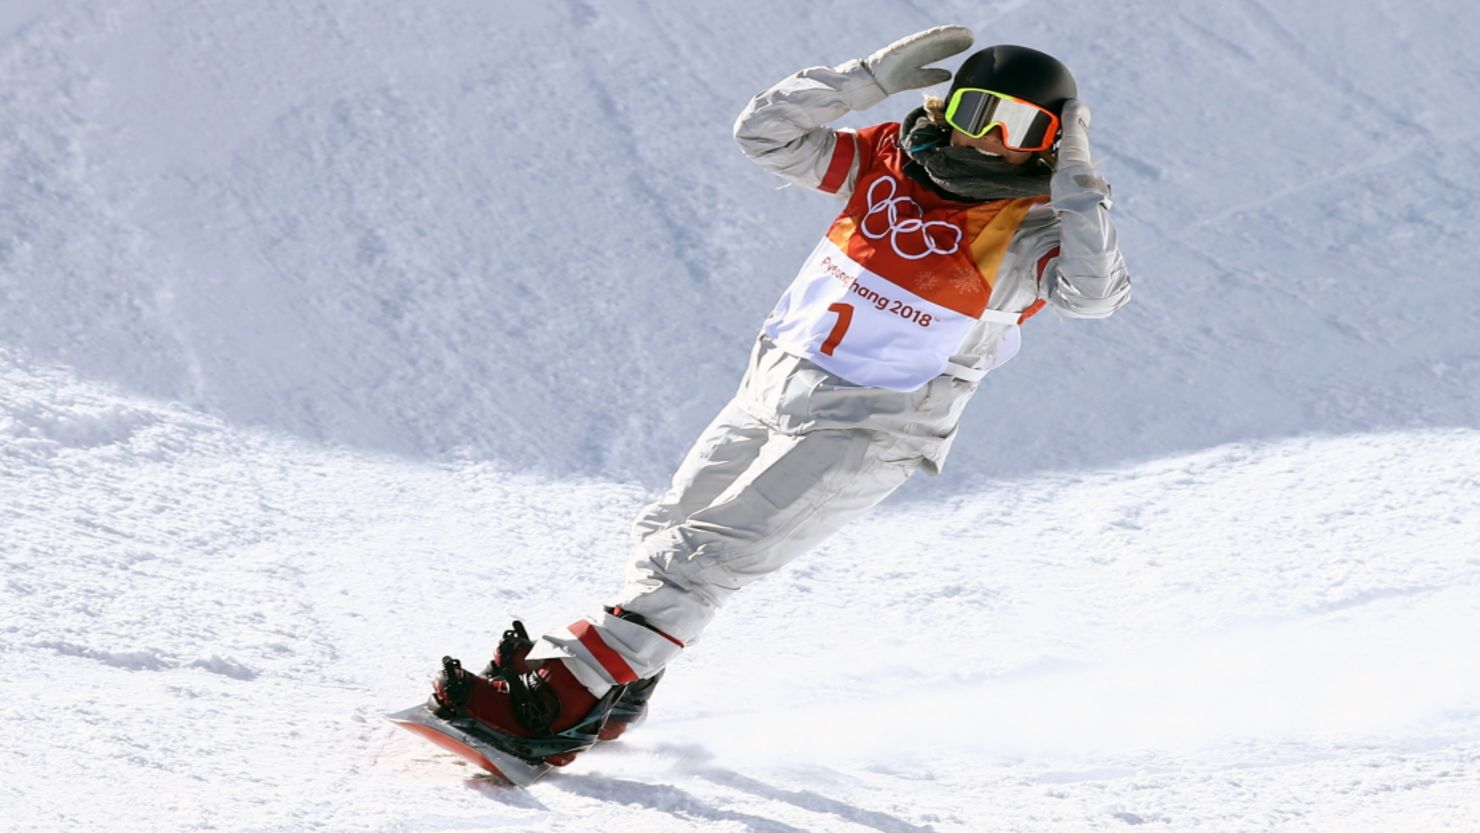 Chloe Kim reacts after a halfpipe run on Tuesday. (Cameron Spencer/Getty Images)